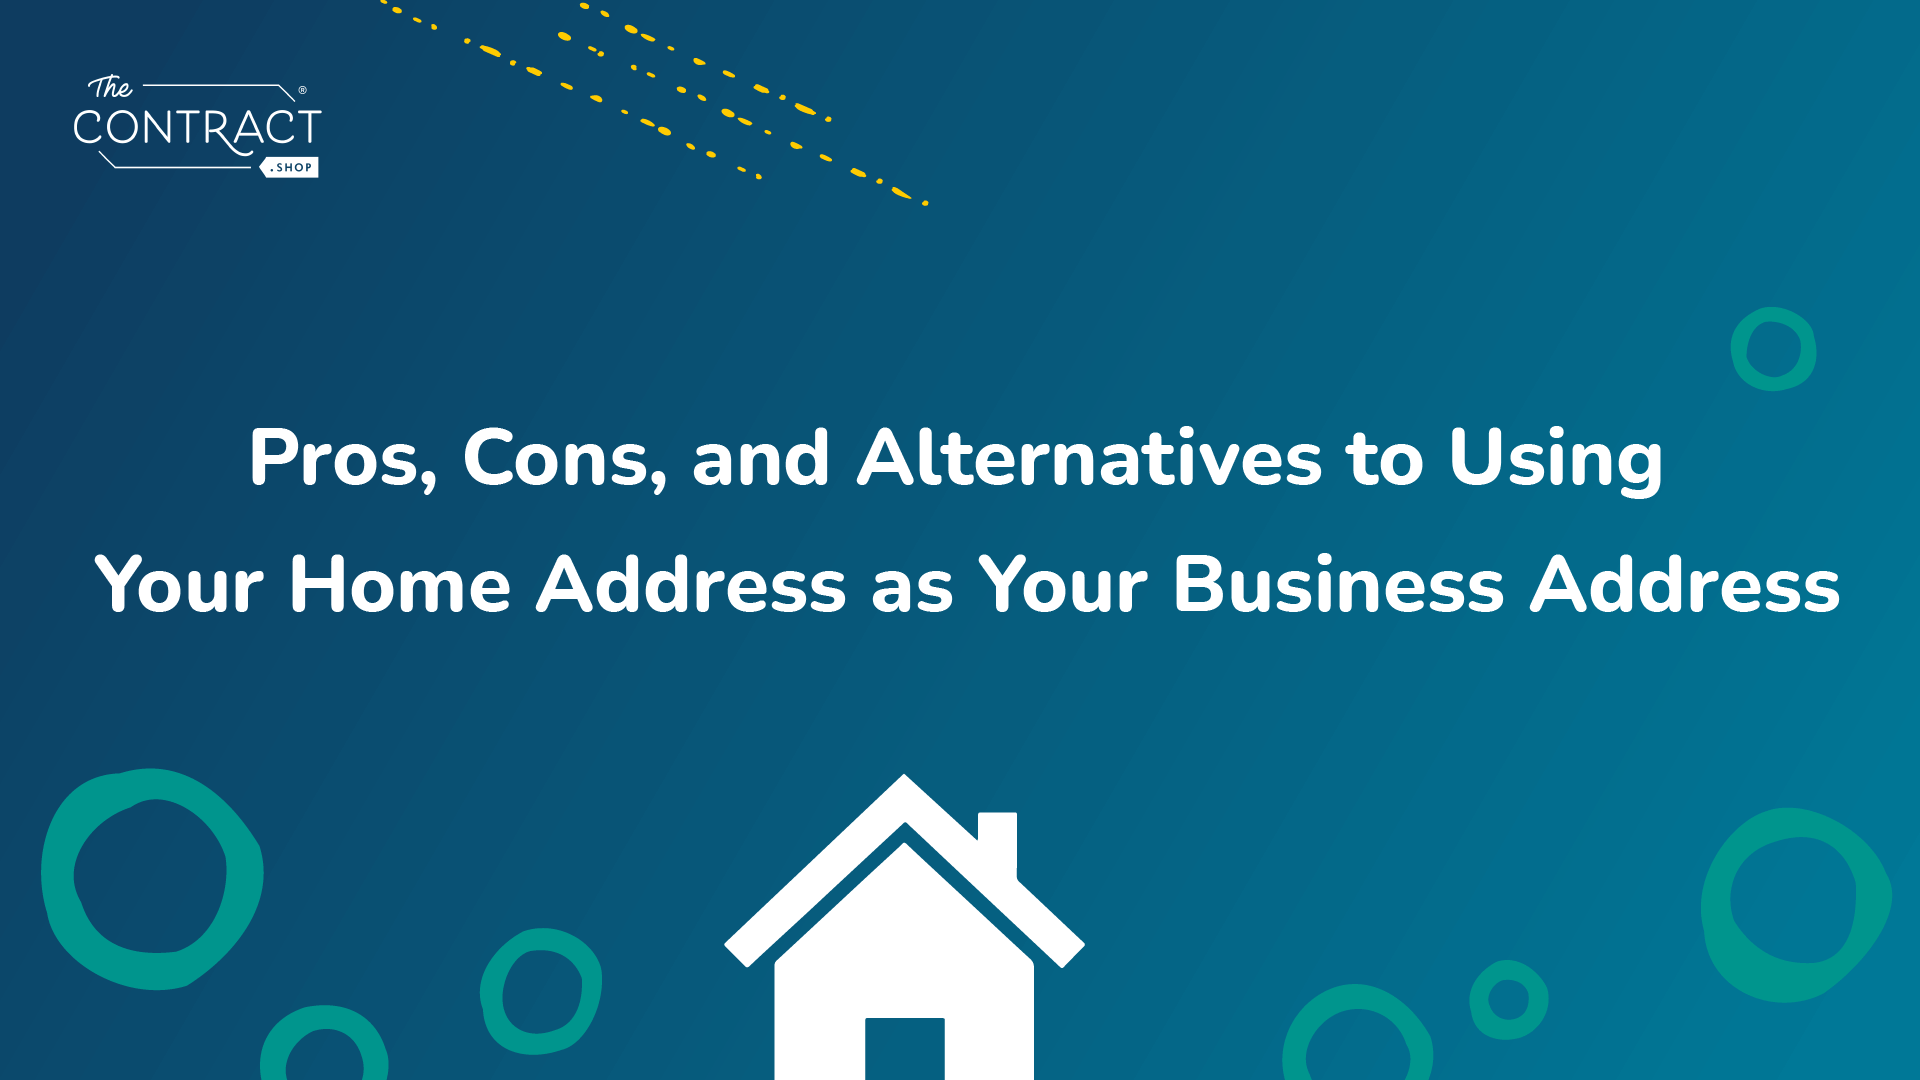 Pros, Cons, and Alternatives to Using Your Home Address as Your Business Address